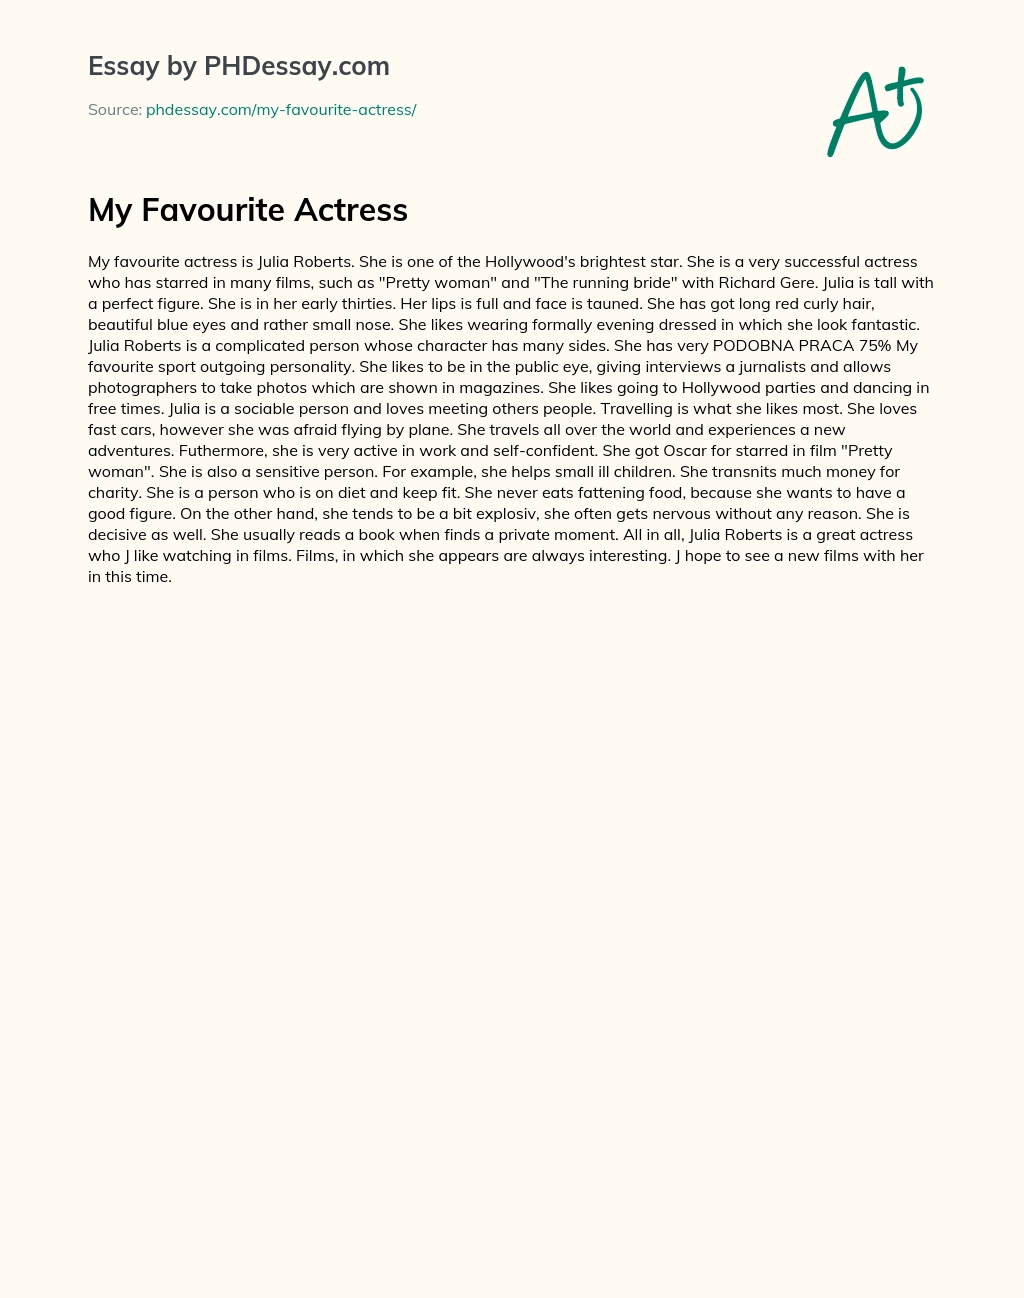 My Favourite Actress essay